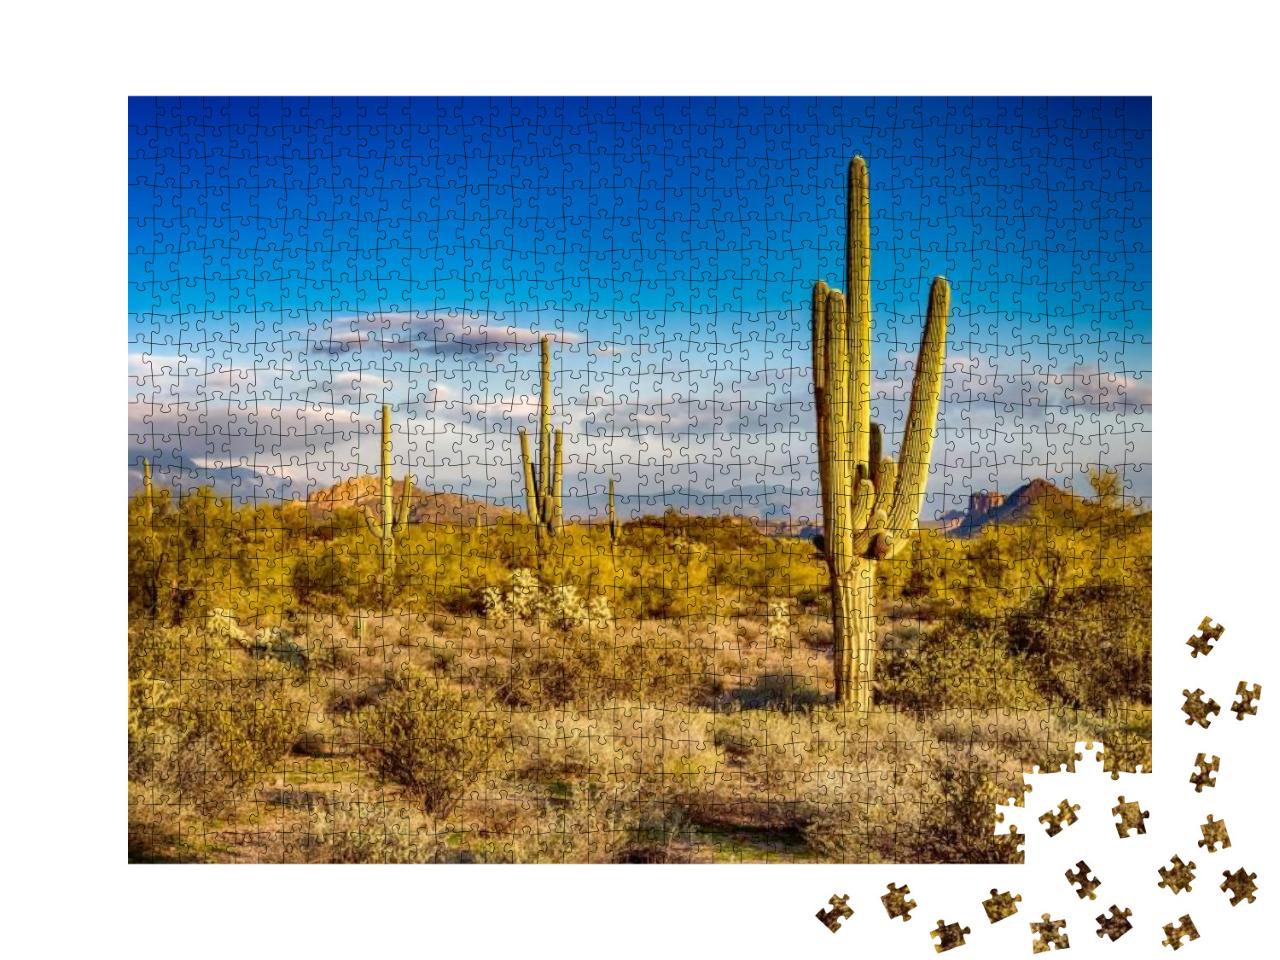 Cactus Desert Wild Outdoor Landscape... Jigsaw Puzzle with 1000 pieces